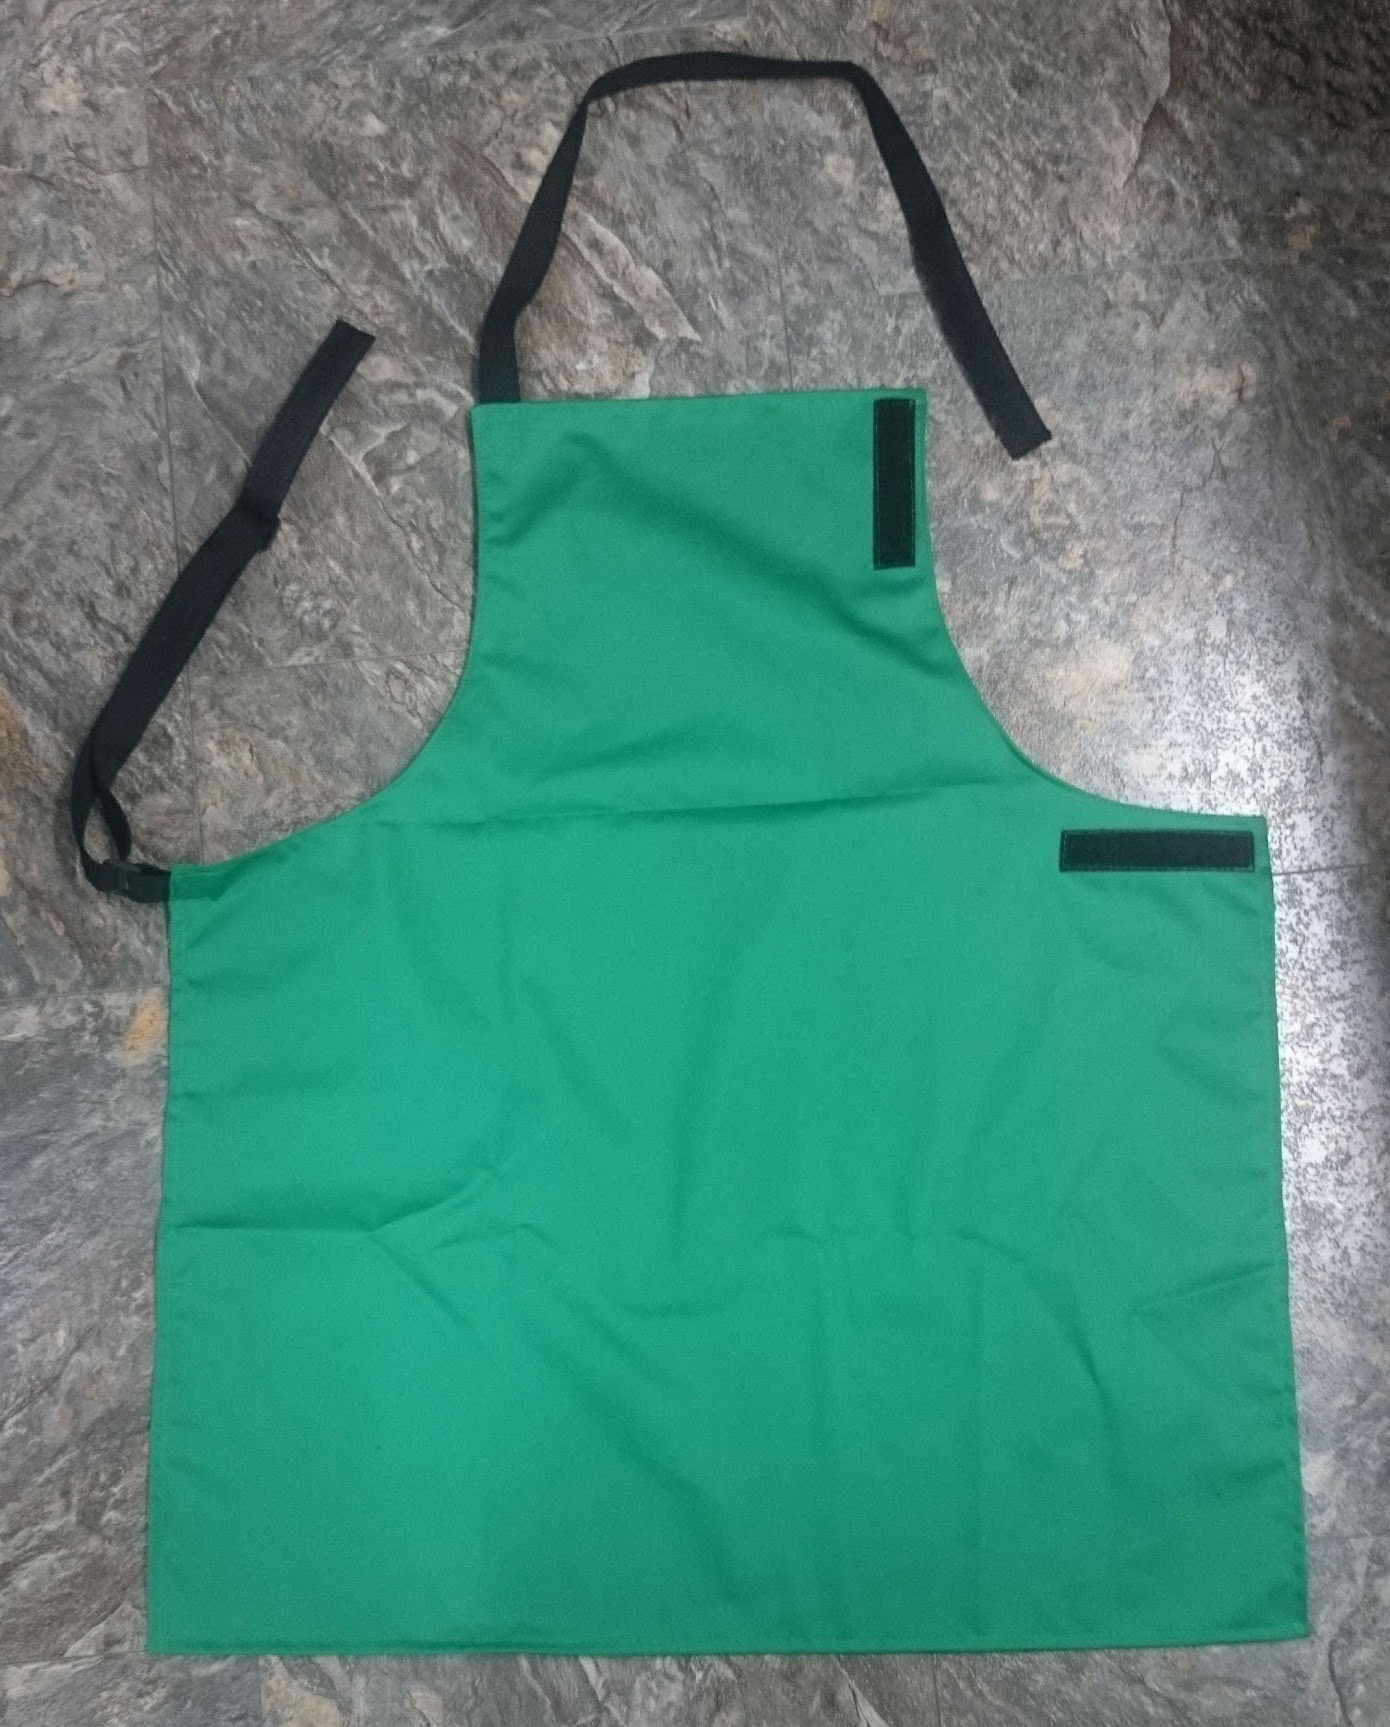 Polycotton Bib  Aprons with safety release straps